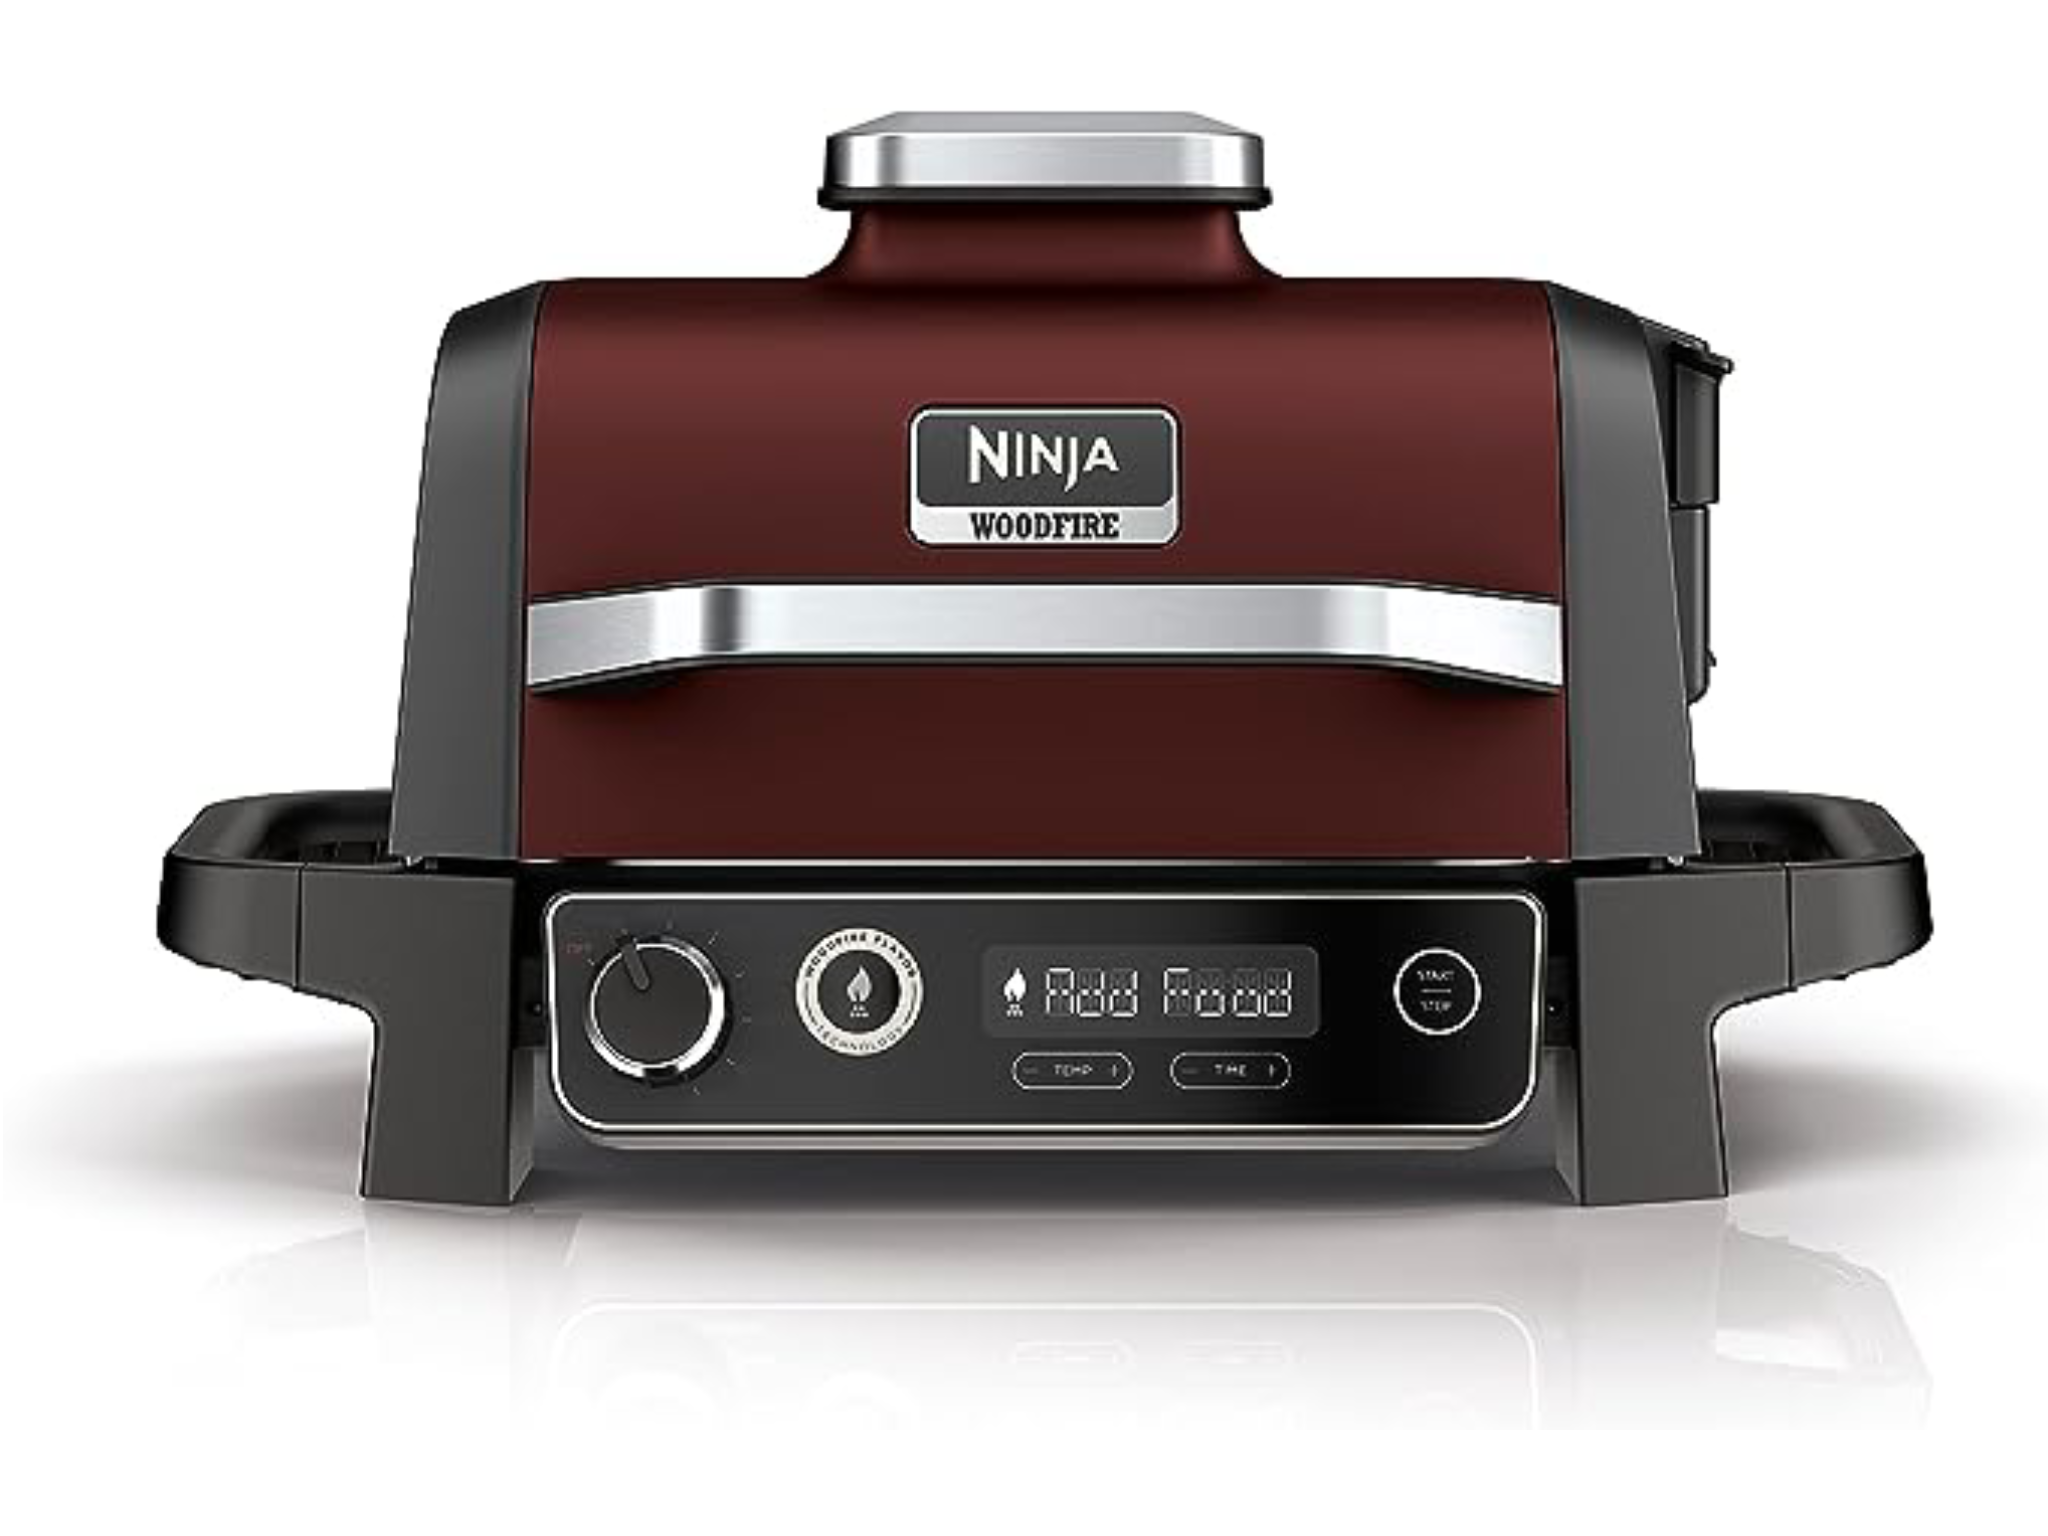 black friday, kitchen appliances, air fryer, indybest, amazon, black friday, best ninja cyber monday deals, from air fryers to blenders